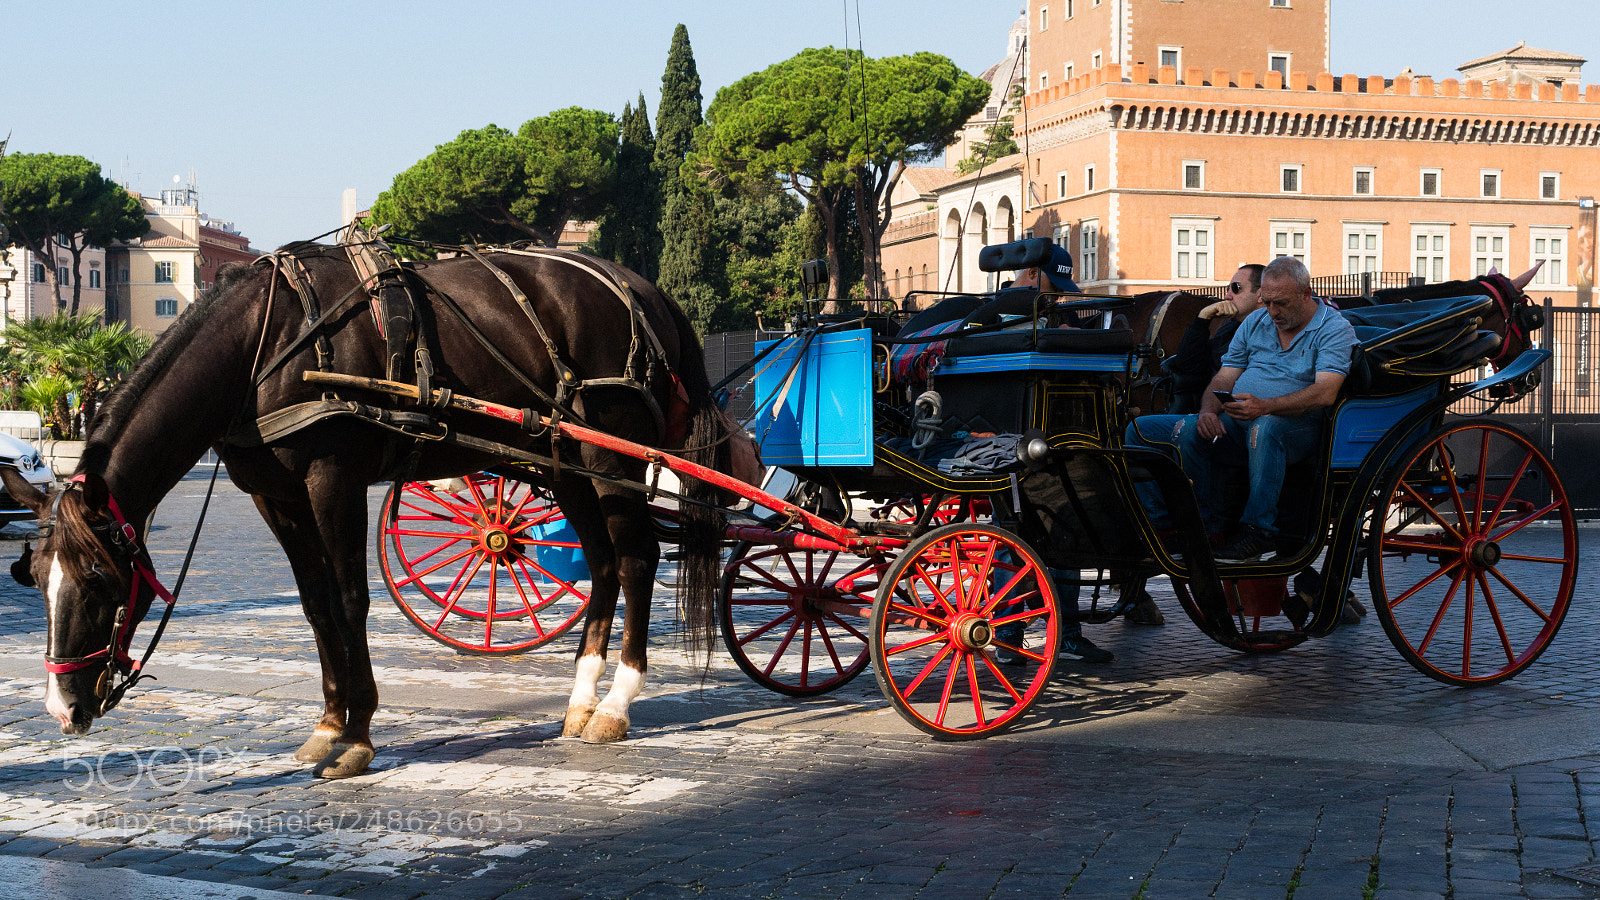 Sony a6500 sample photo. Horse and carriage, rome photography